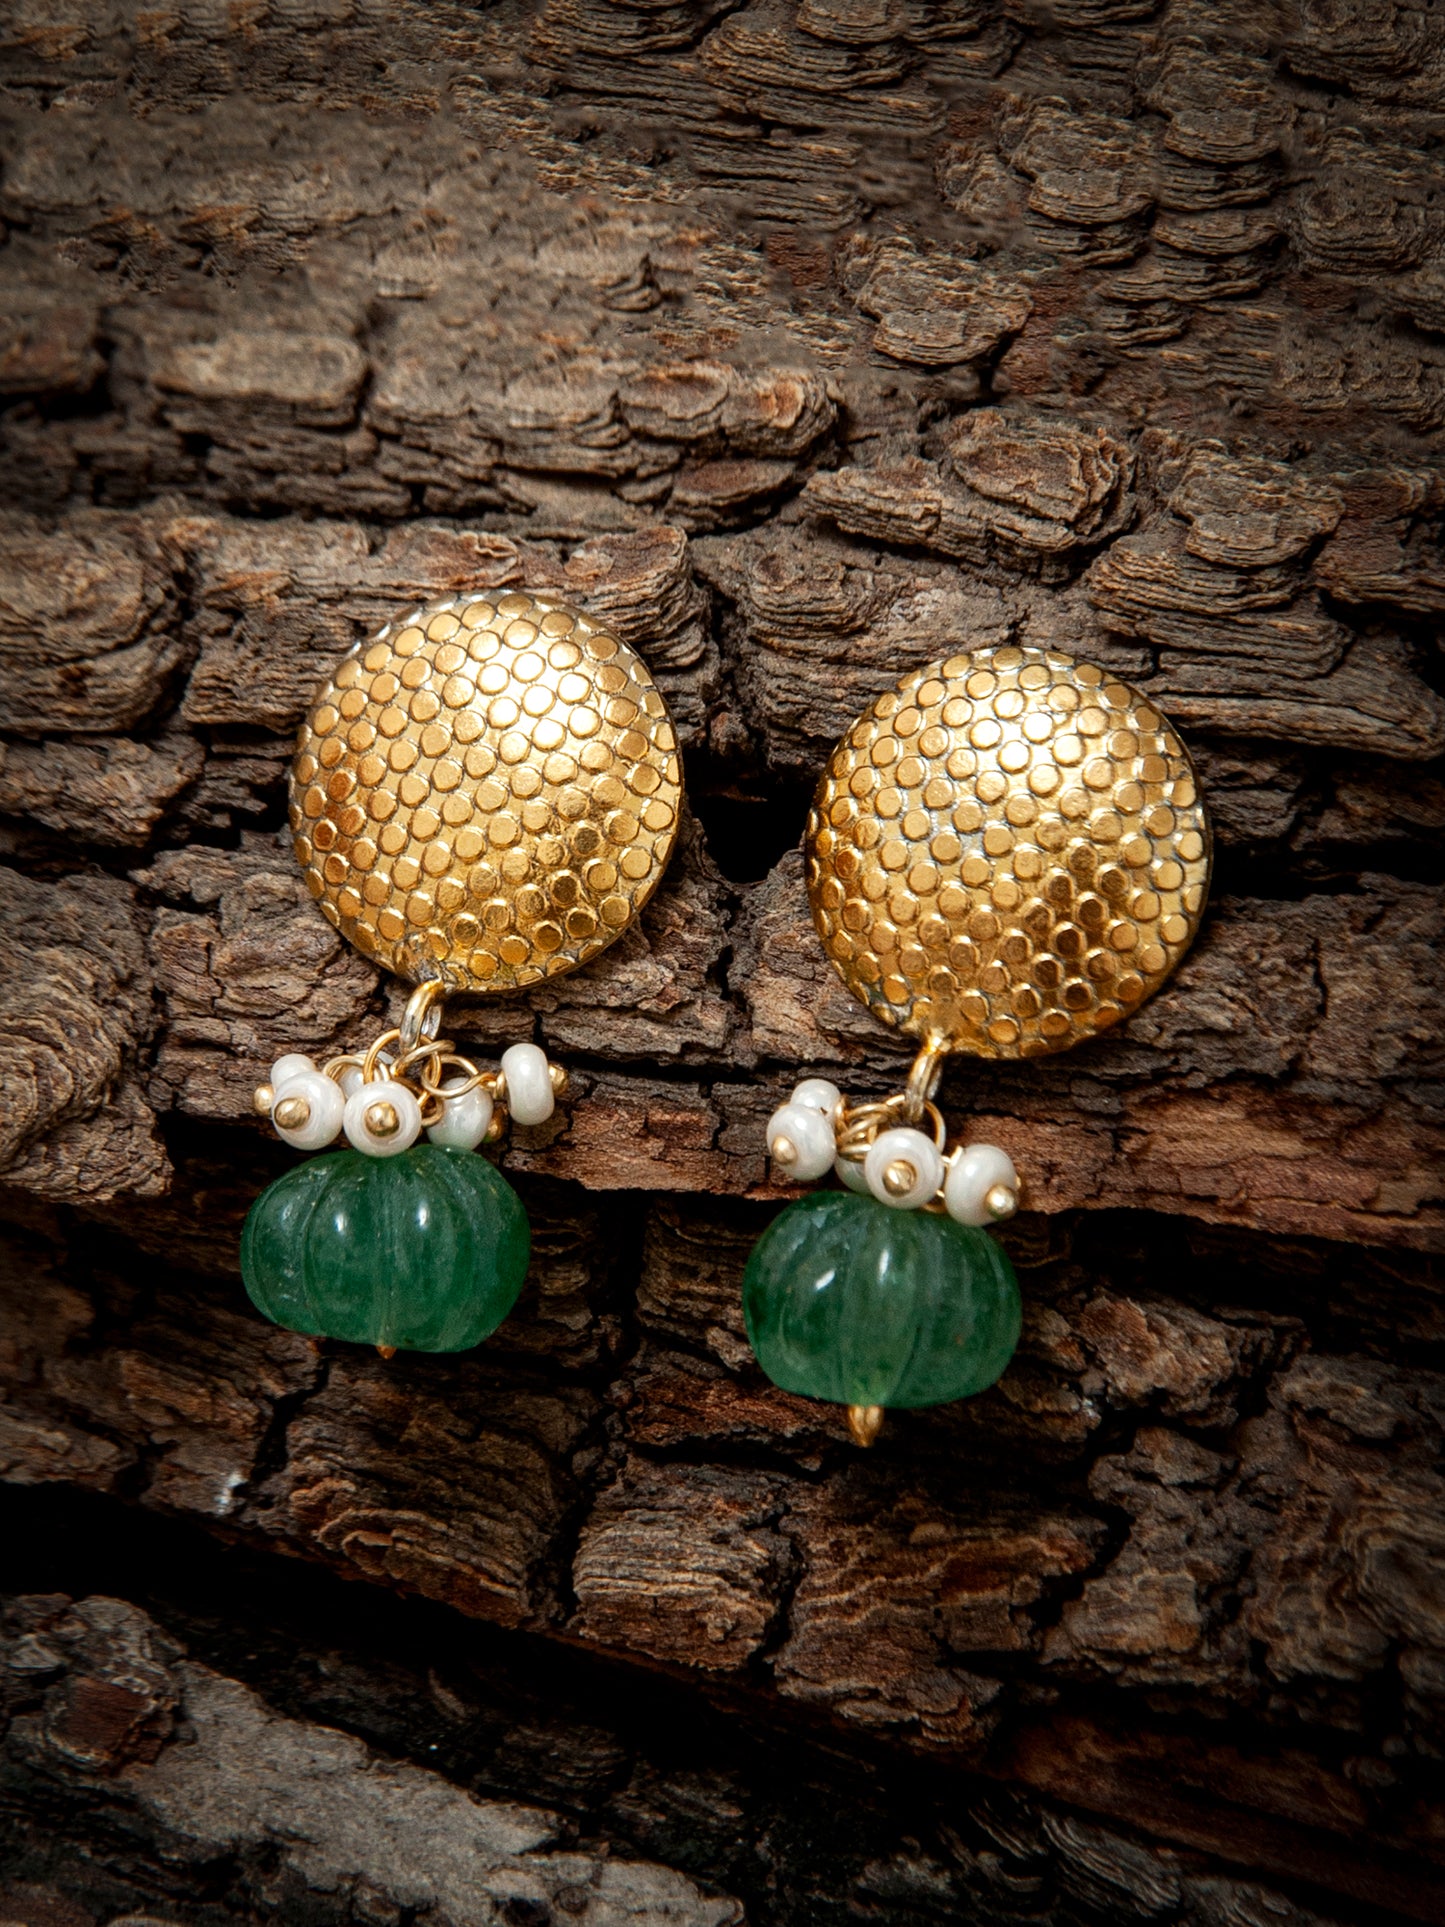 925 Sterling Silver Gold Plated Studs with Melon Cut Green Onyx and Pearl